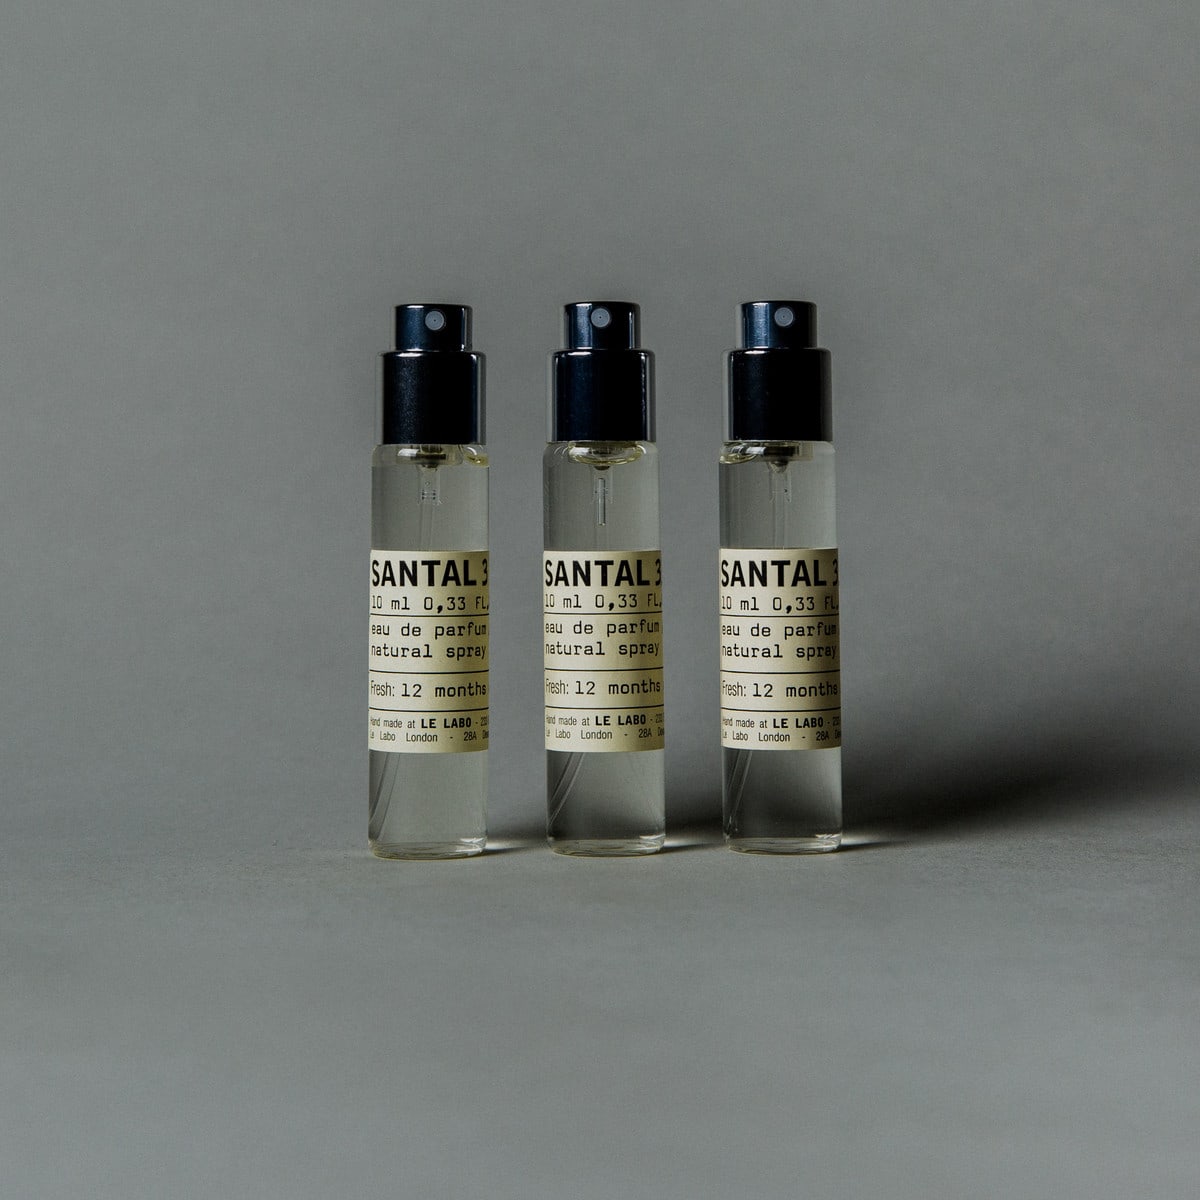 Le Labo Santal 33: The Scent That Went From Ruggedly Cool To Utterly Basic  - Fashionista